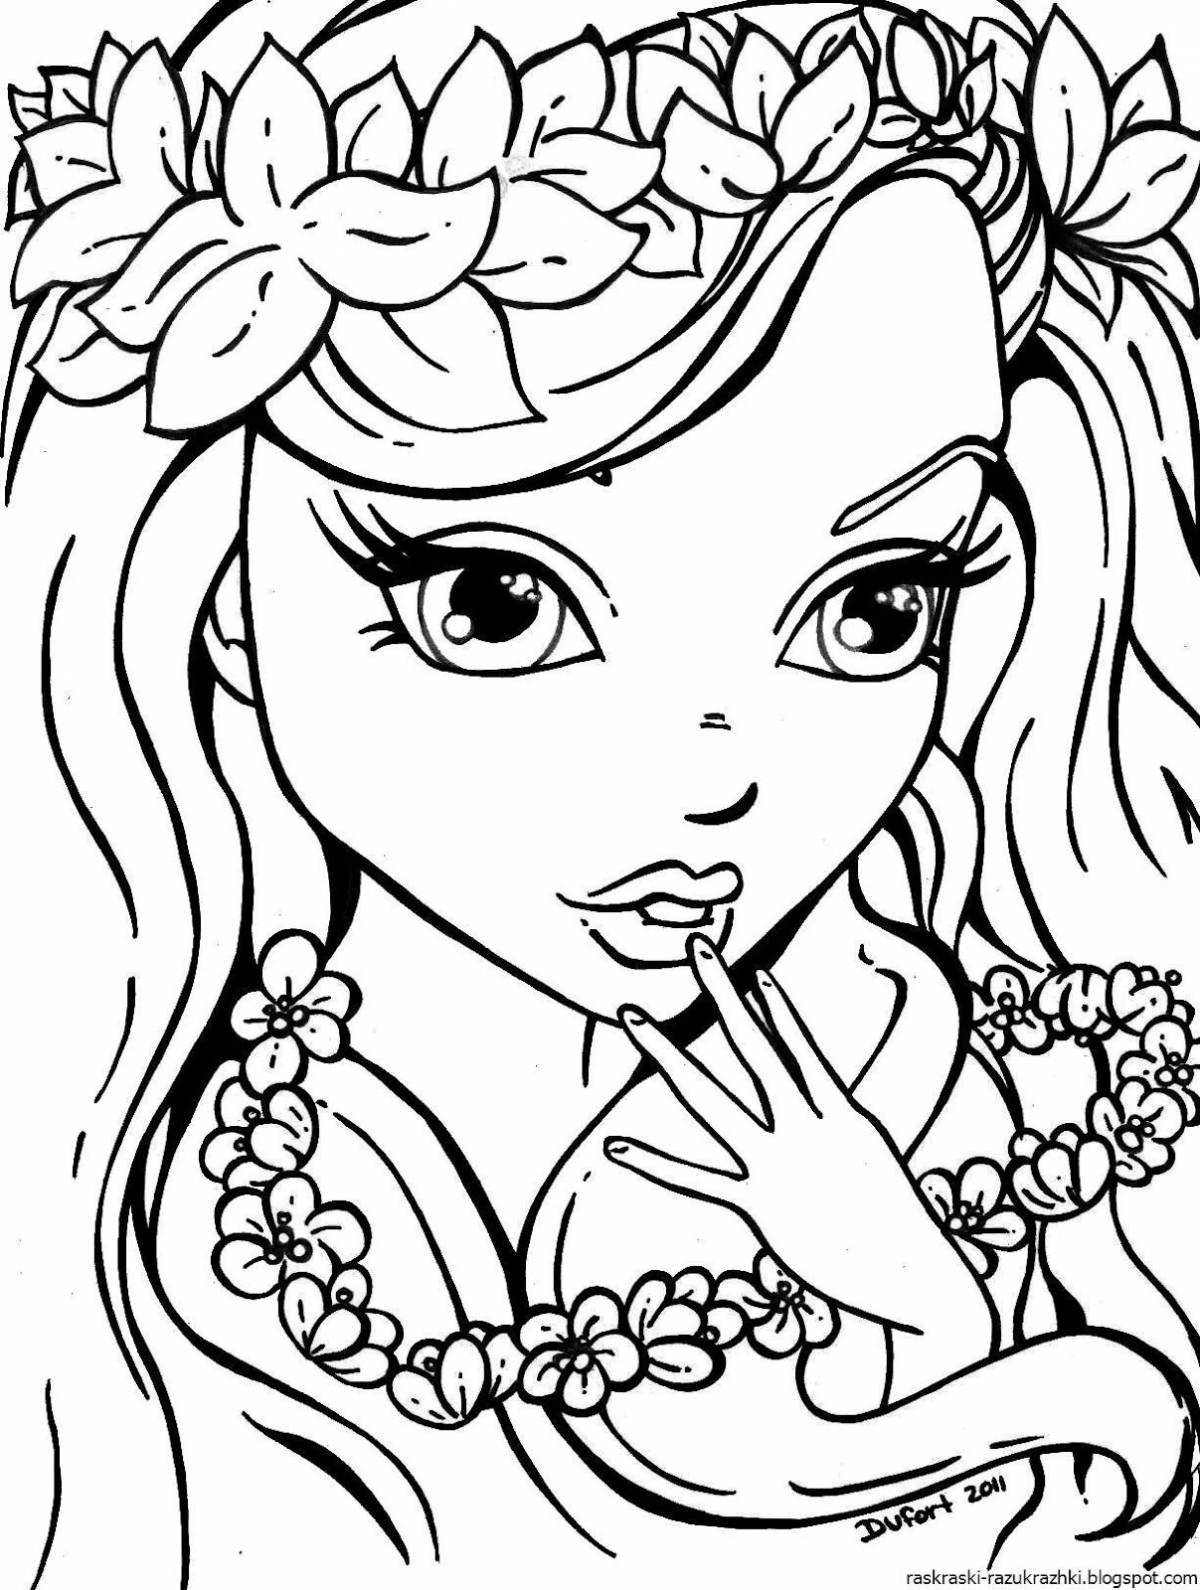 Inspirational coloring book for girls 10-15 years old